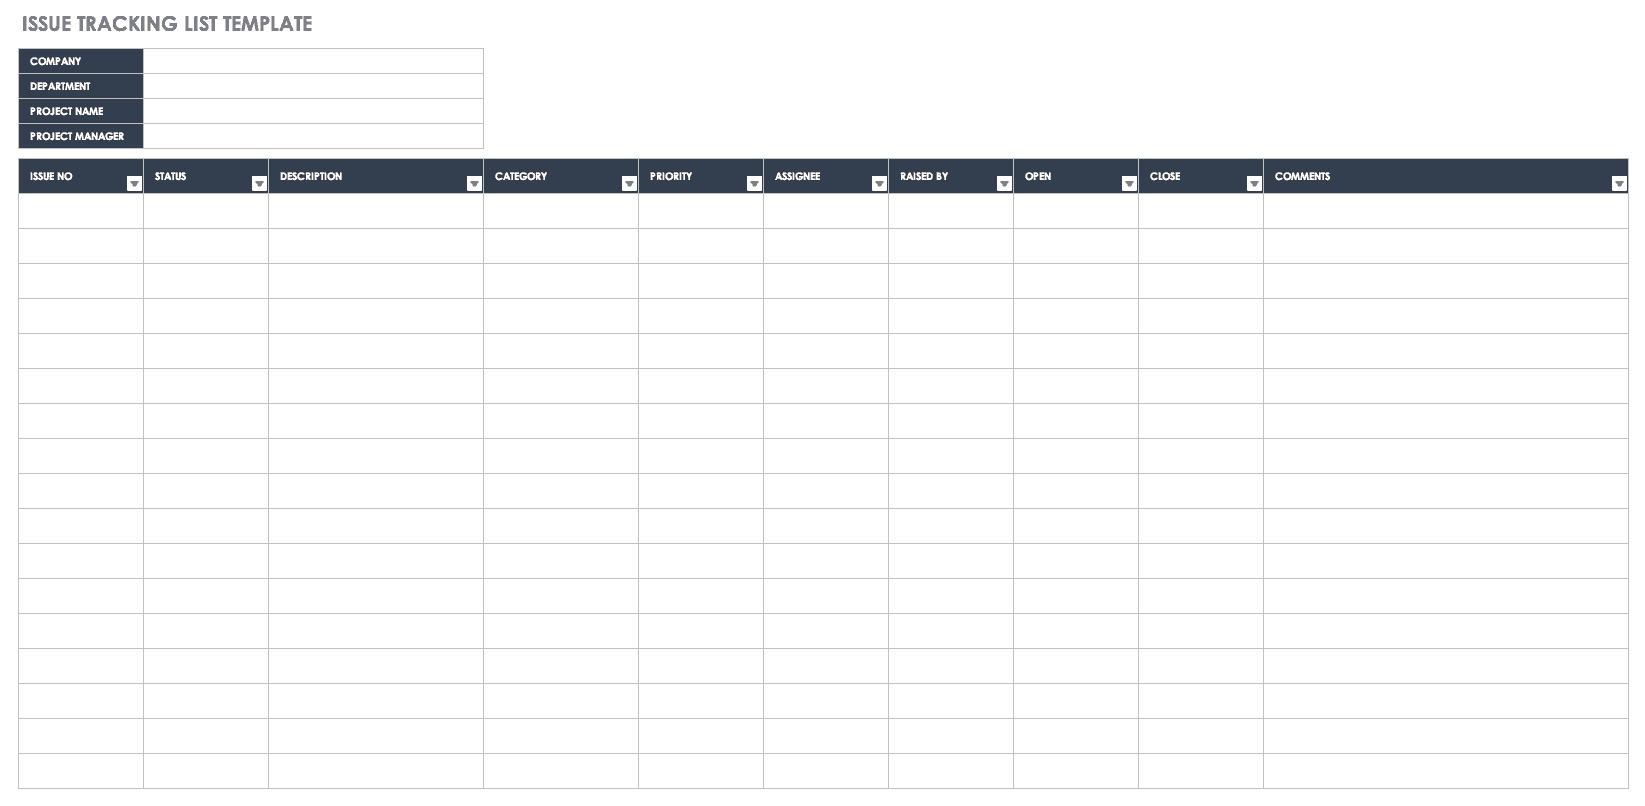 Issue Tracking List Template